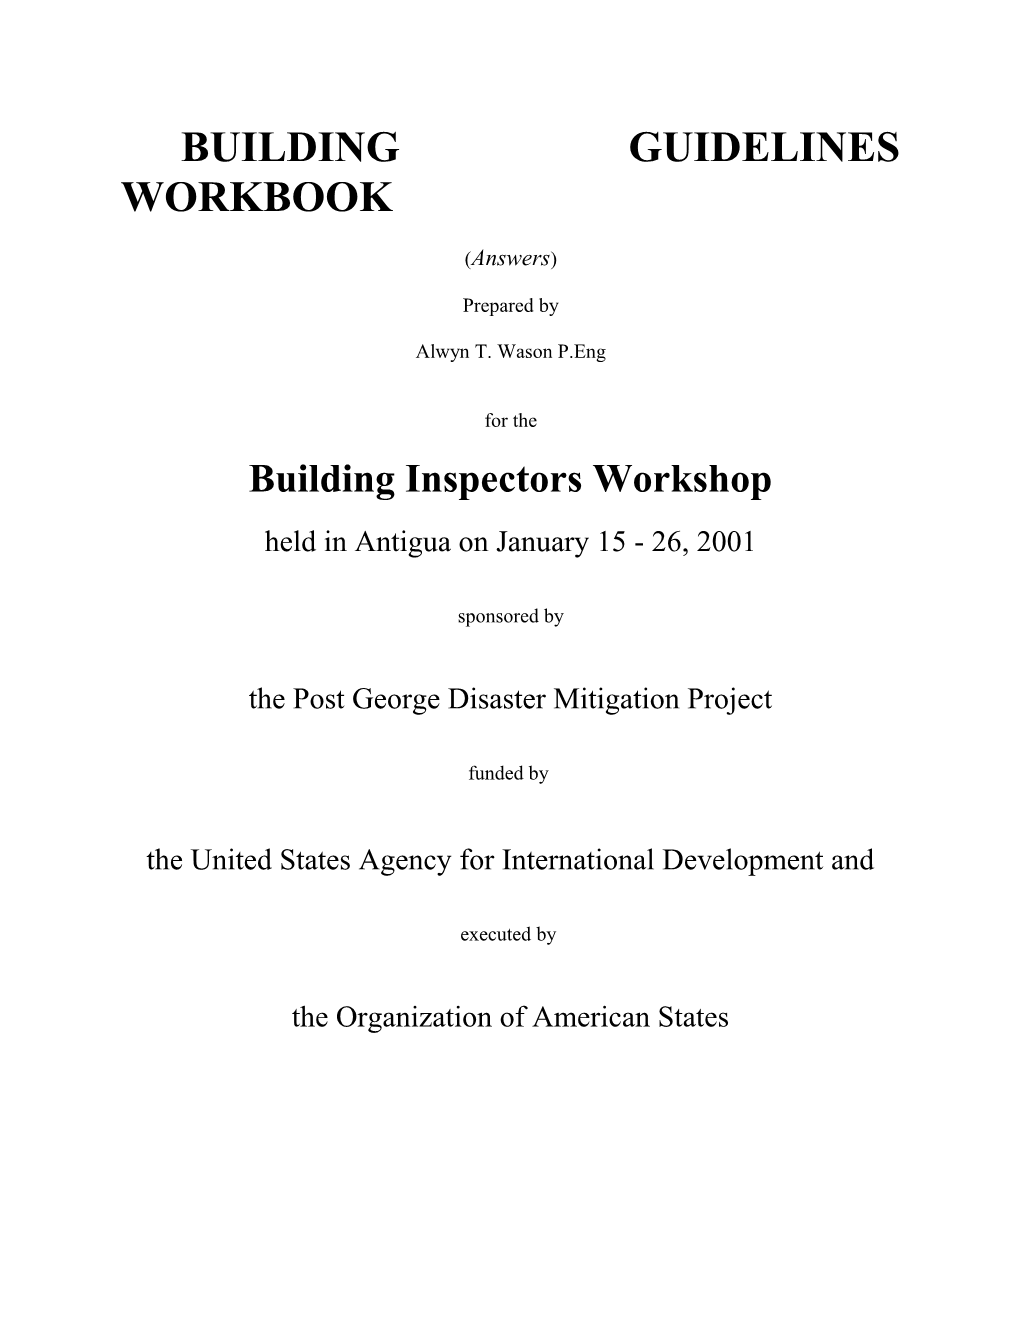 USAID/OAS PGDM Building Inspectors Workbook: Answers